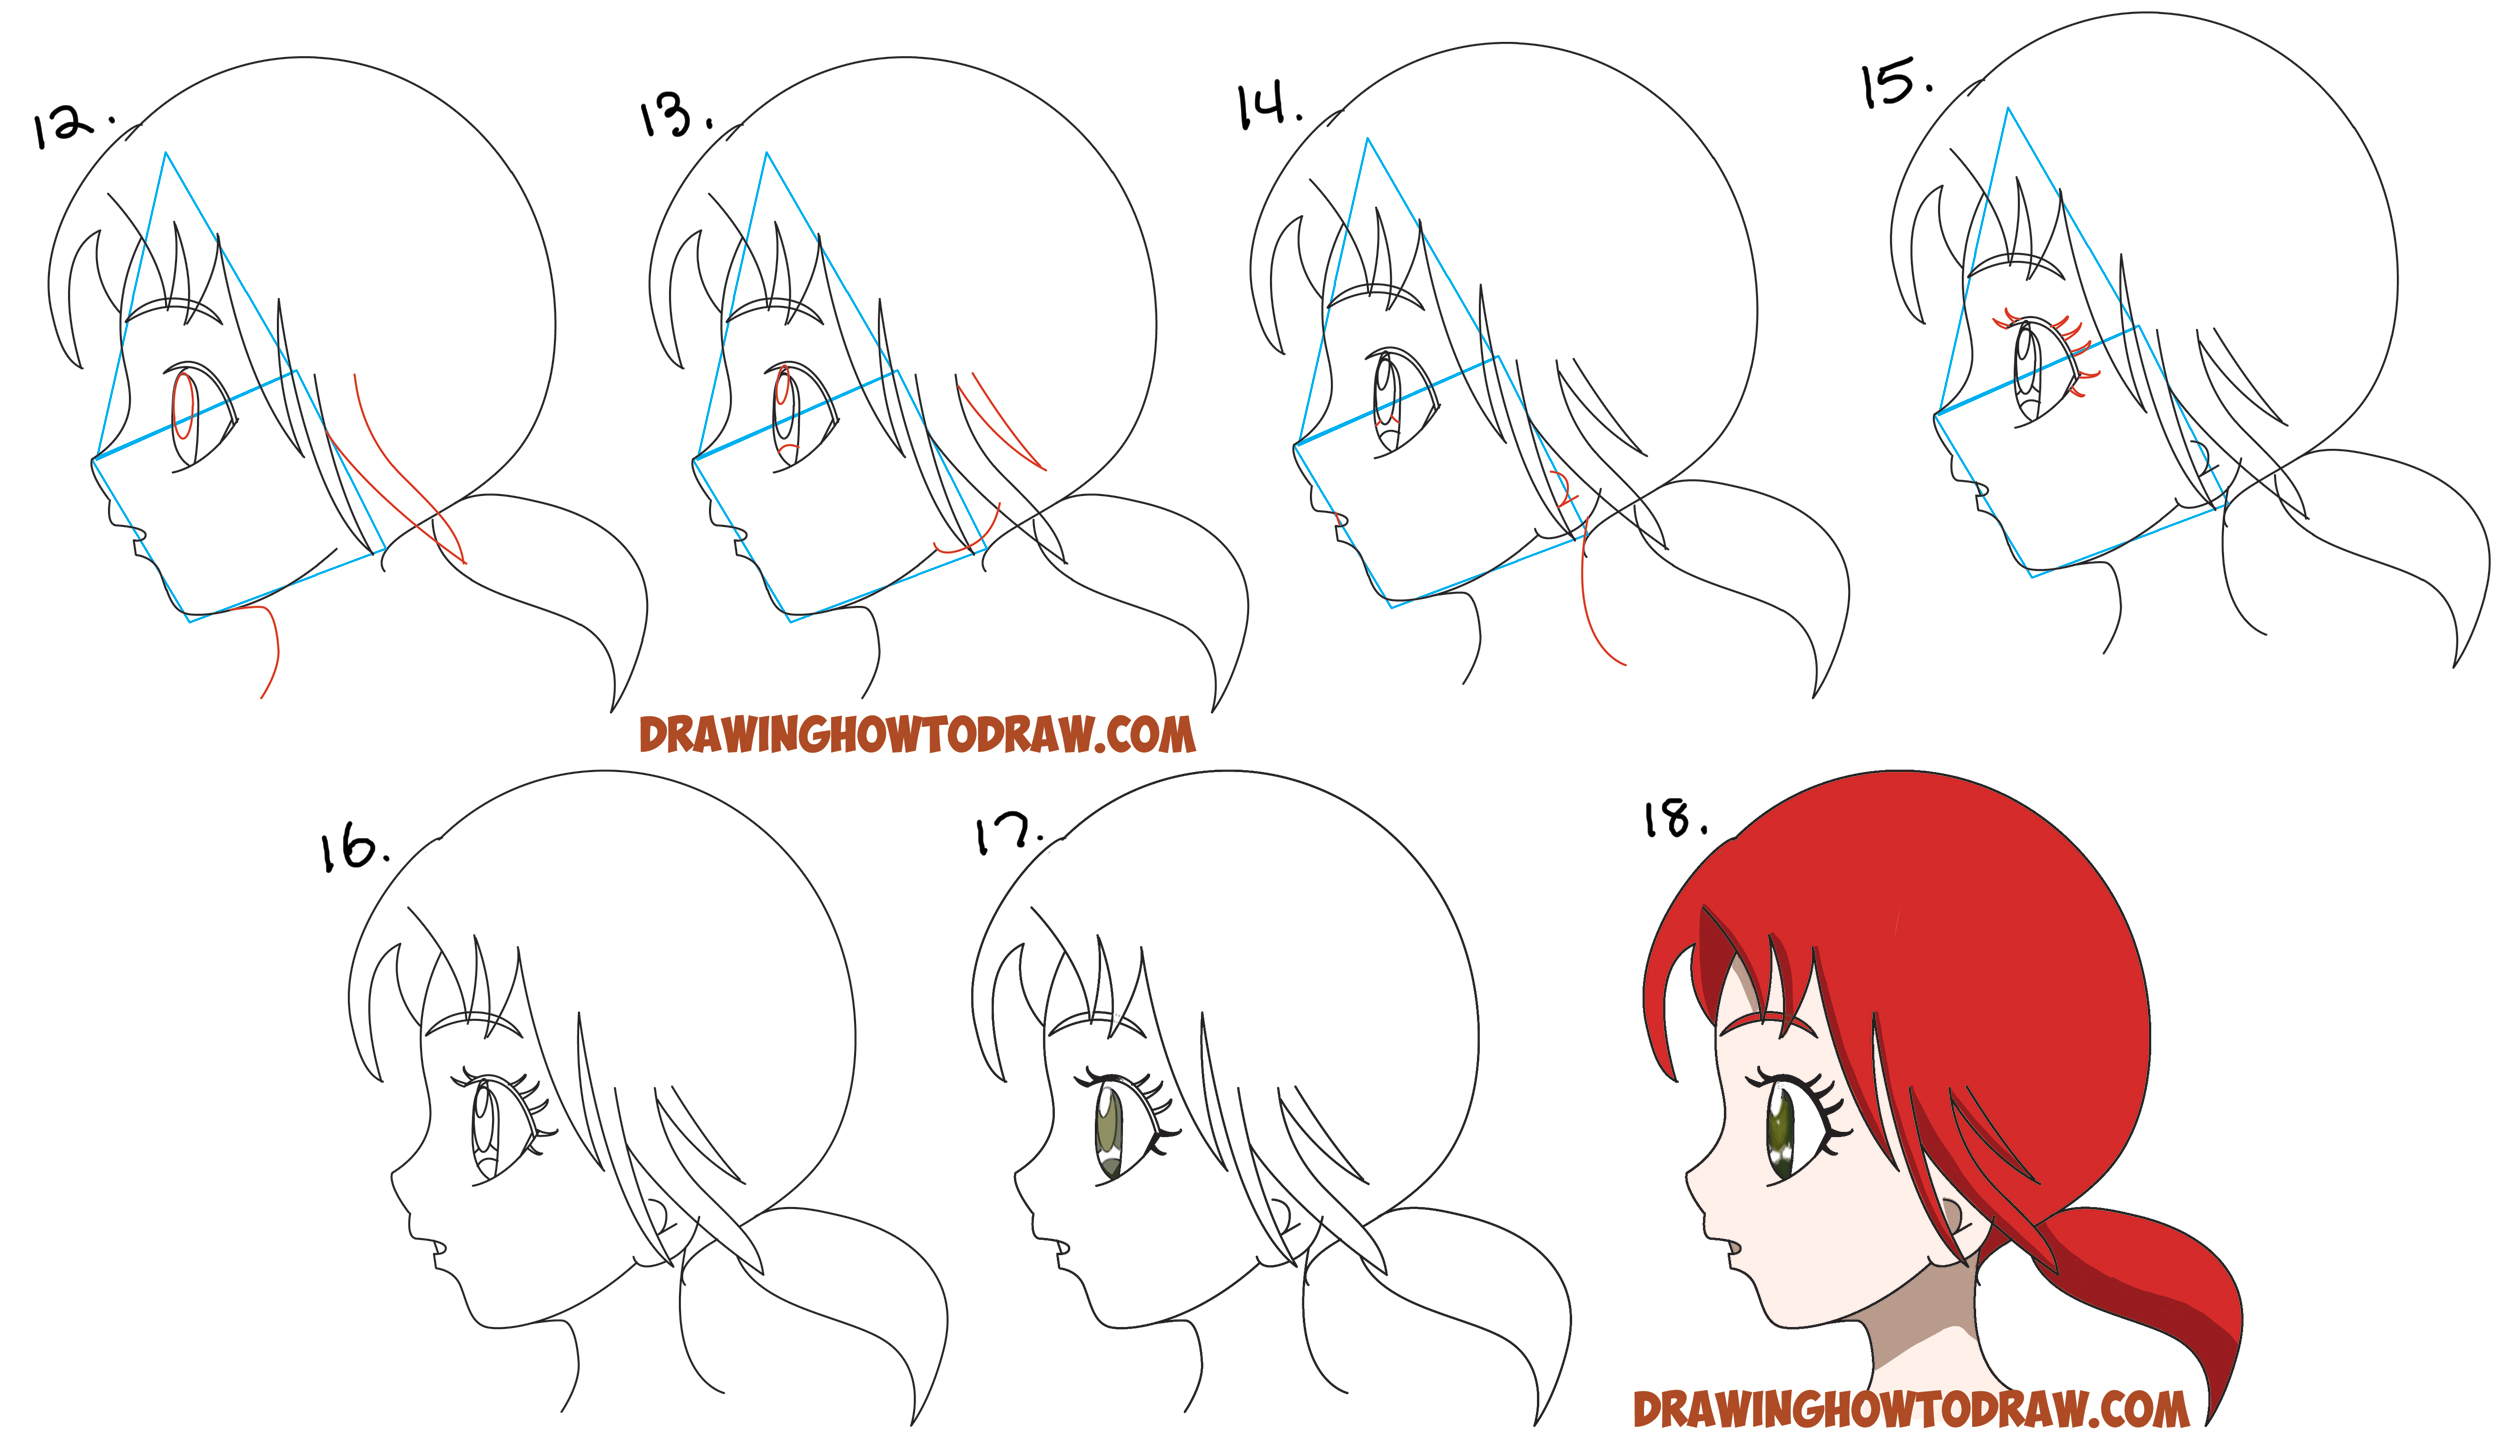 How to Draw an Anime / Manga Face and Eyes from the Side in Profile